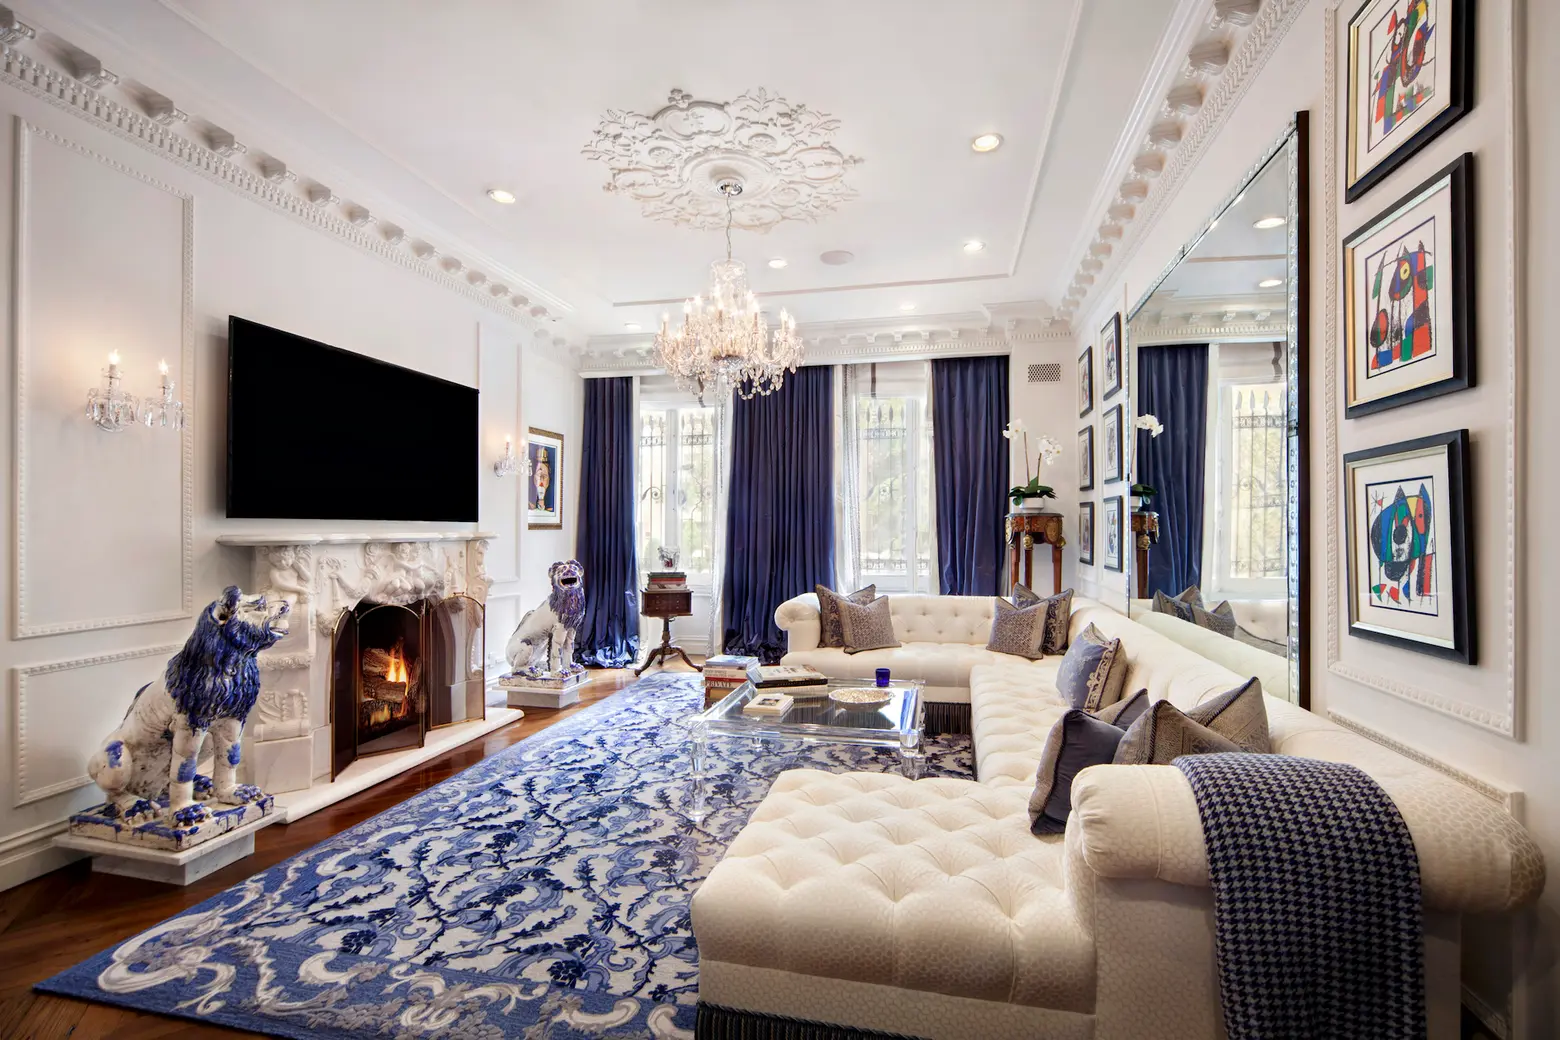 A touch of Versailles comes to the Upper East Side in this luxuriant $2.2M co-op